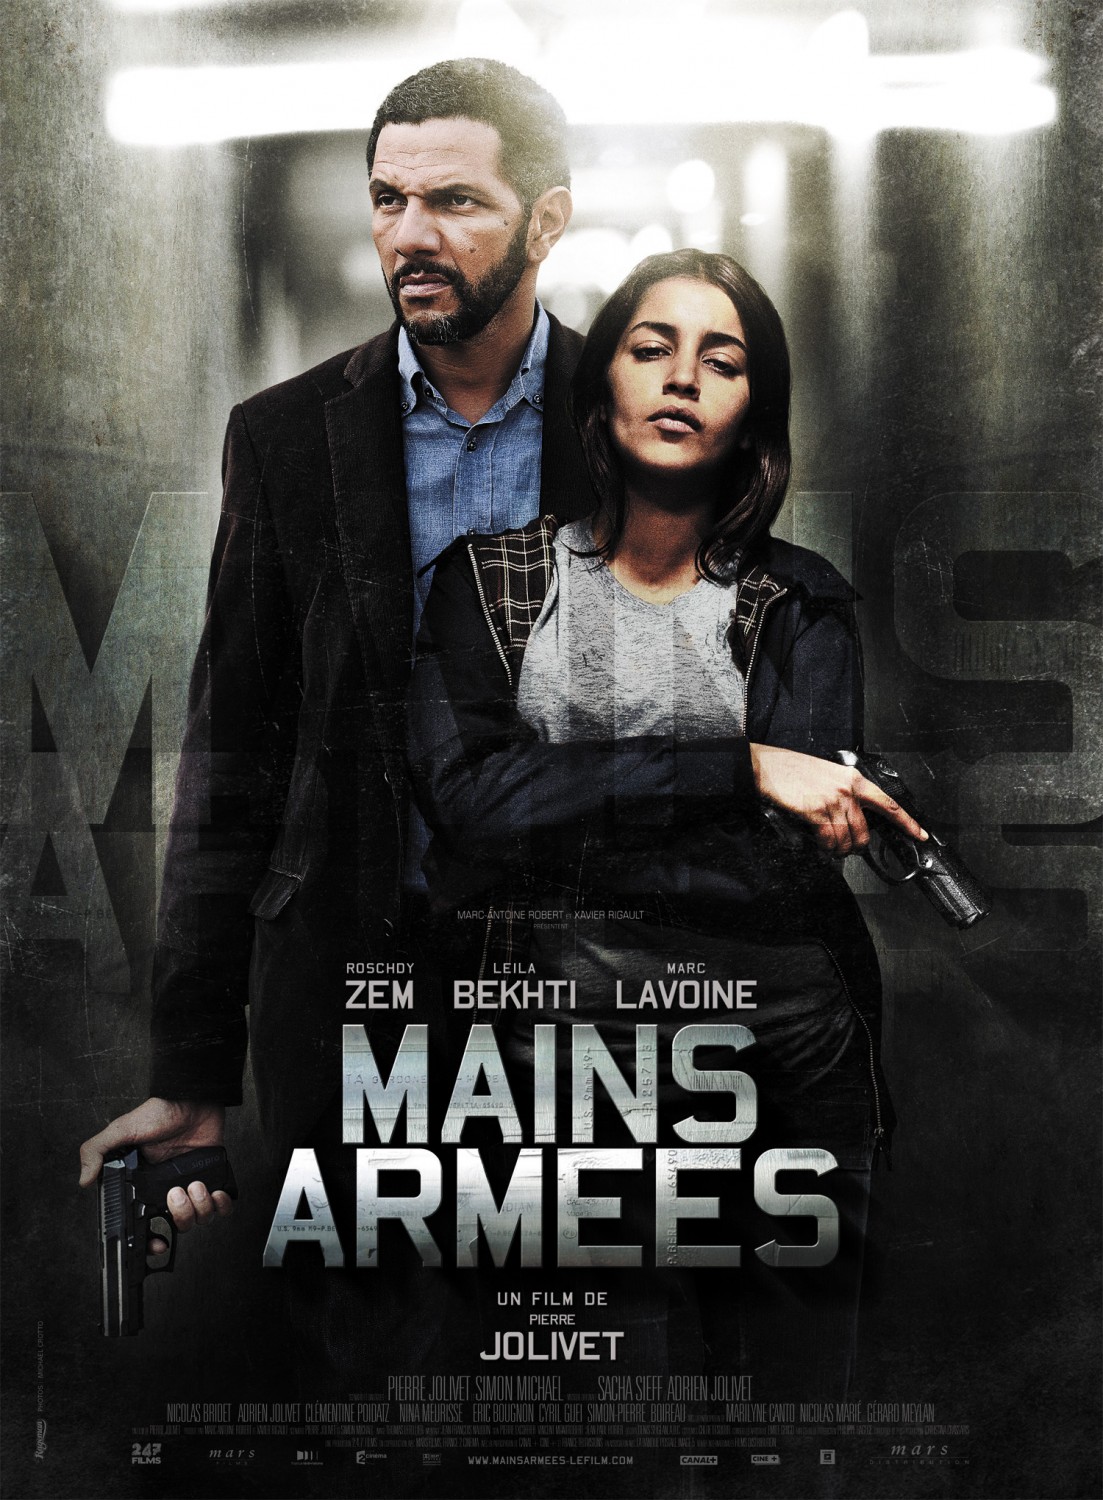 Extra Large Movie Poster Image for Mains armées (#1 of 2)